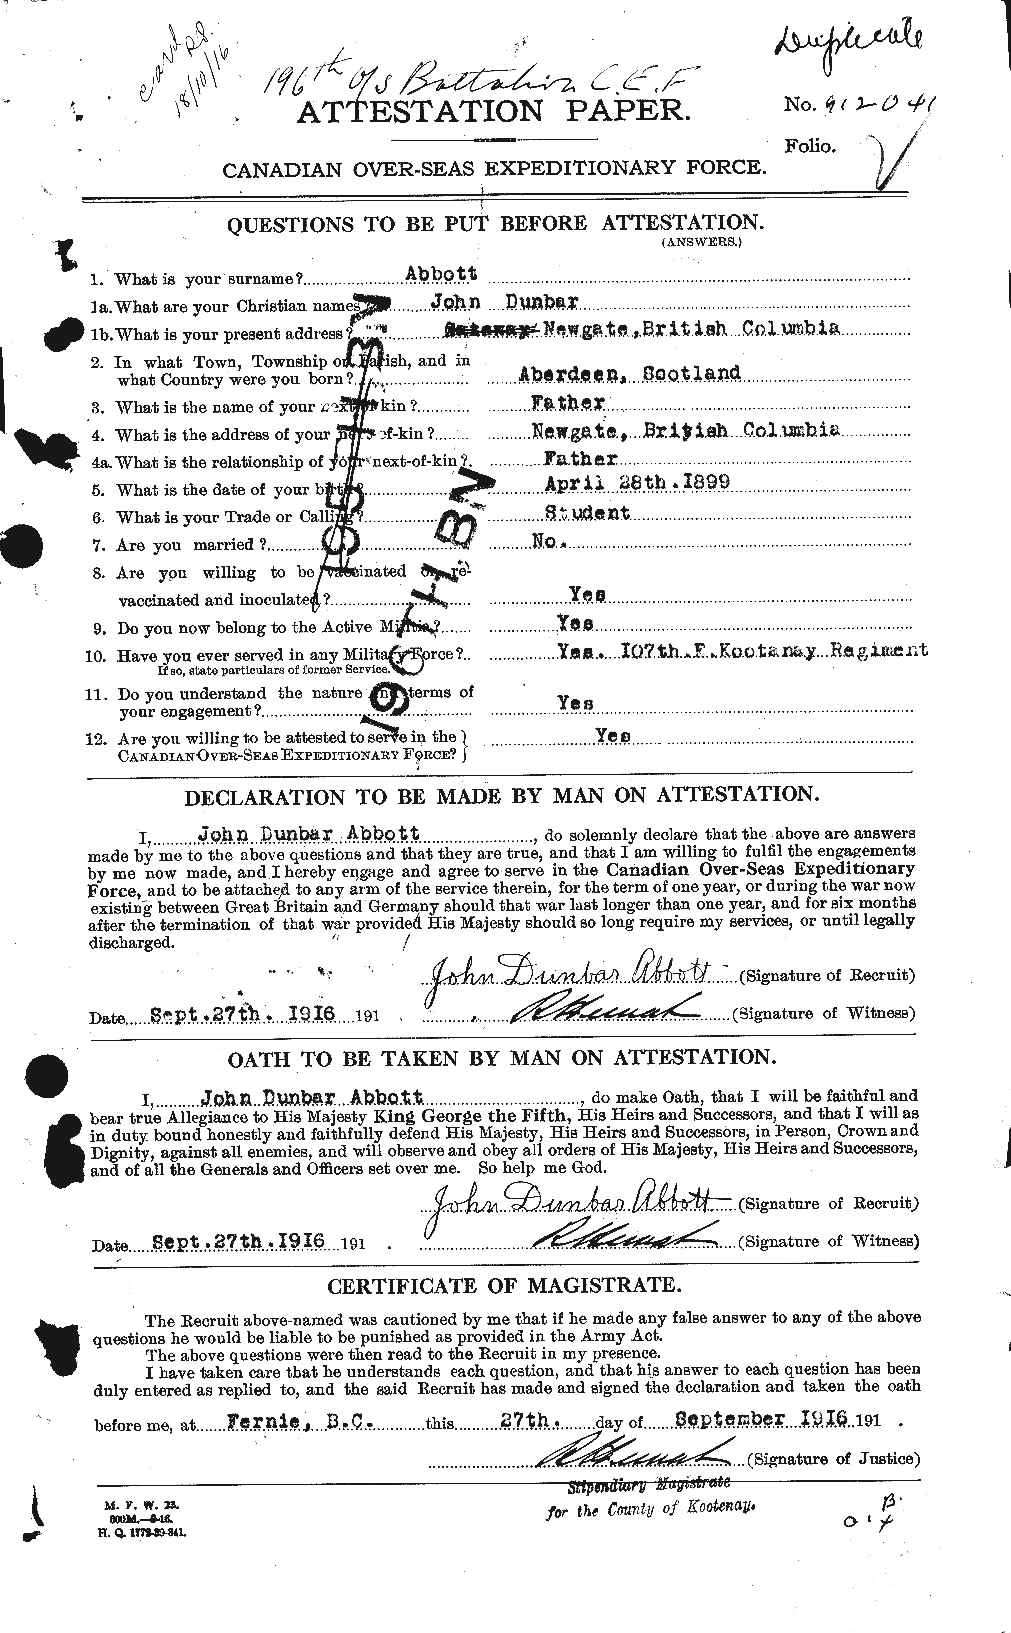 Personnel Records of the First World War - CEF 200991a